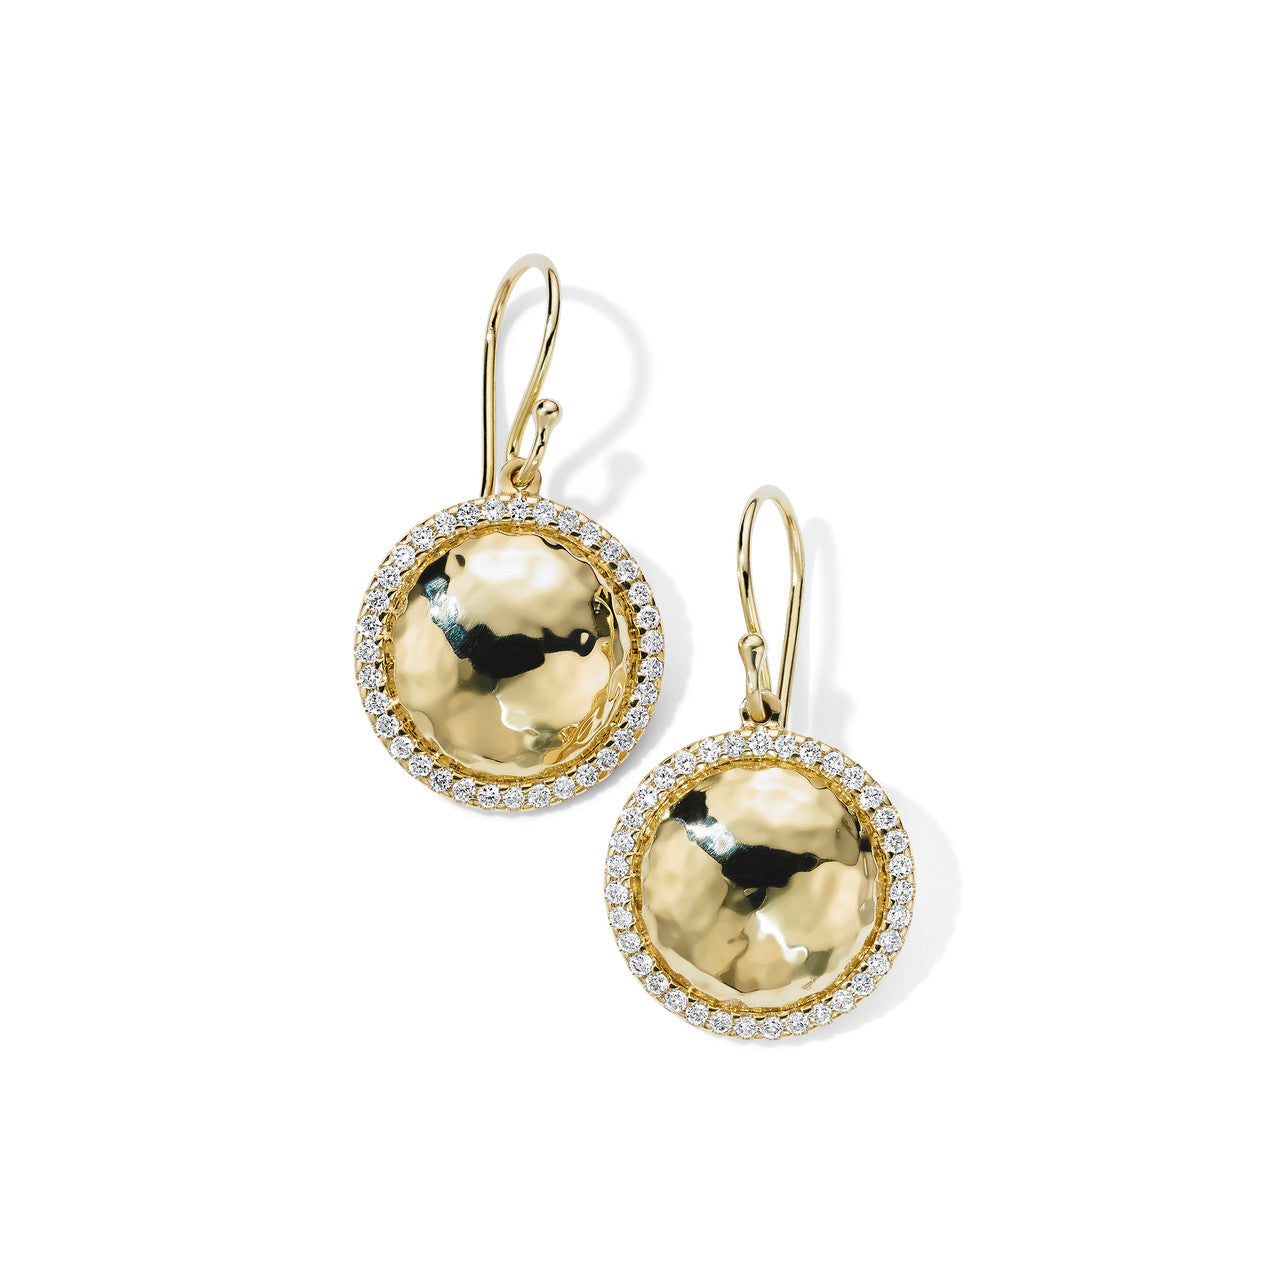 Stardust Goddess Medium Hammered Dome Earrings with Diamonds